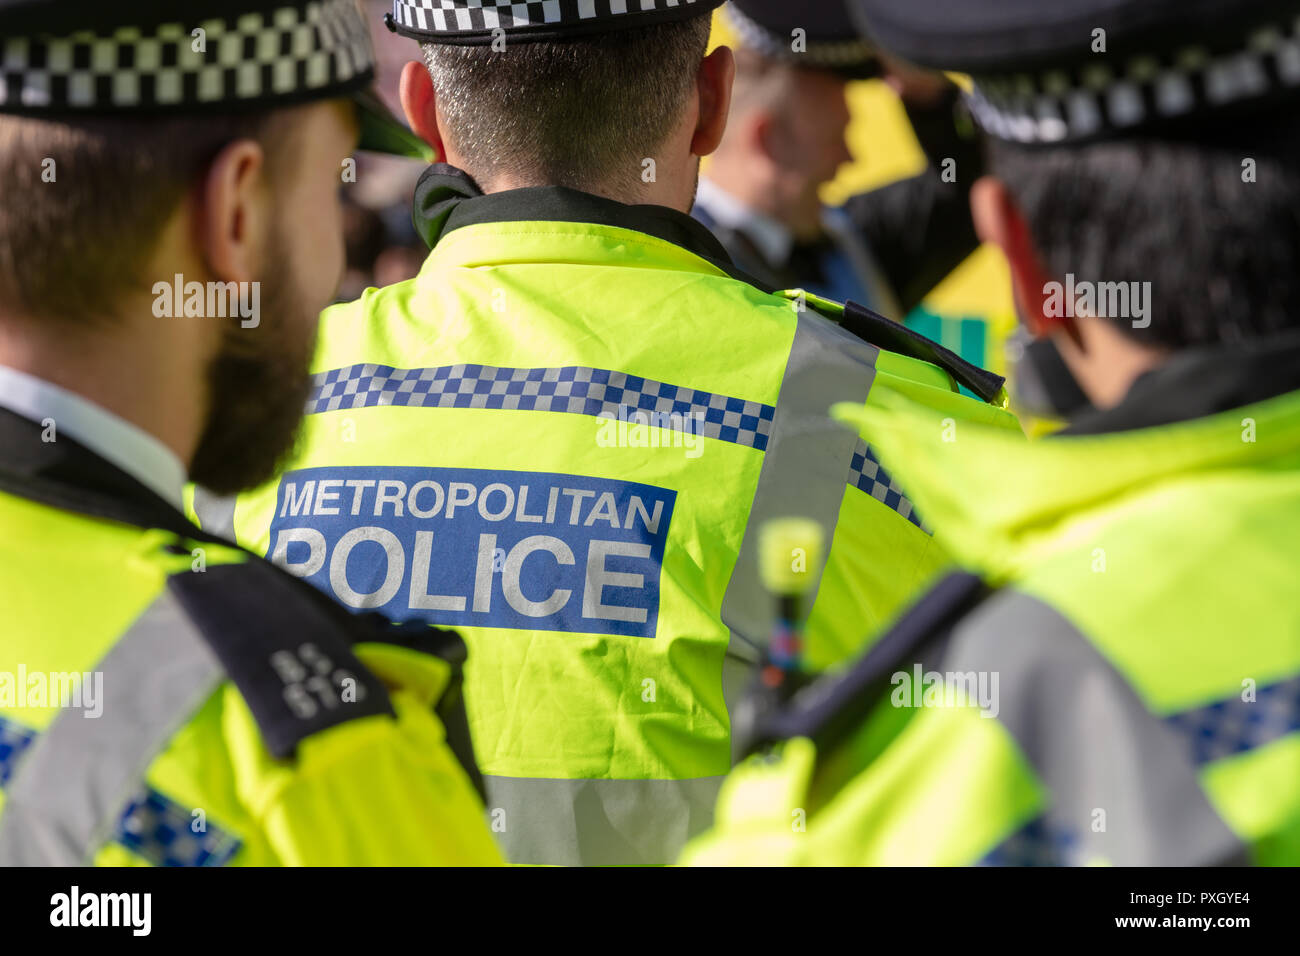 London, England; 20th October 2018; Rear view of Metropolitan Police Officers Wearing High Visibility Jackets in London Stock Photo